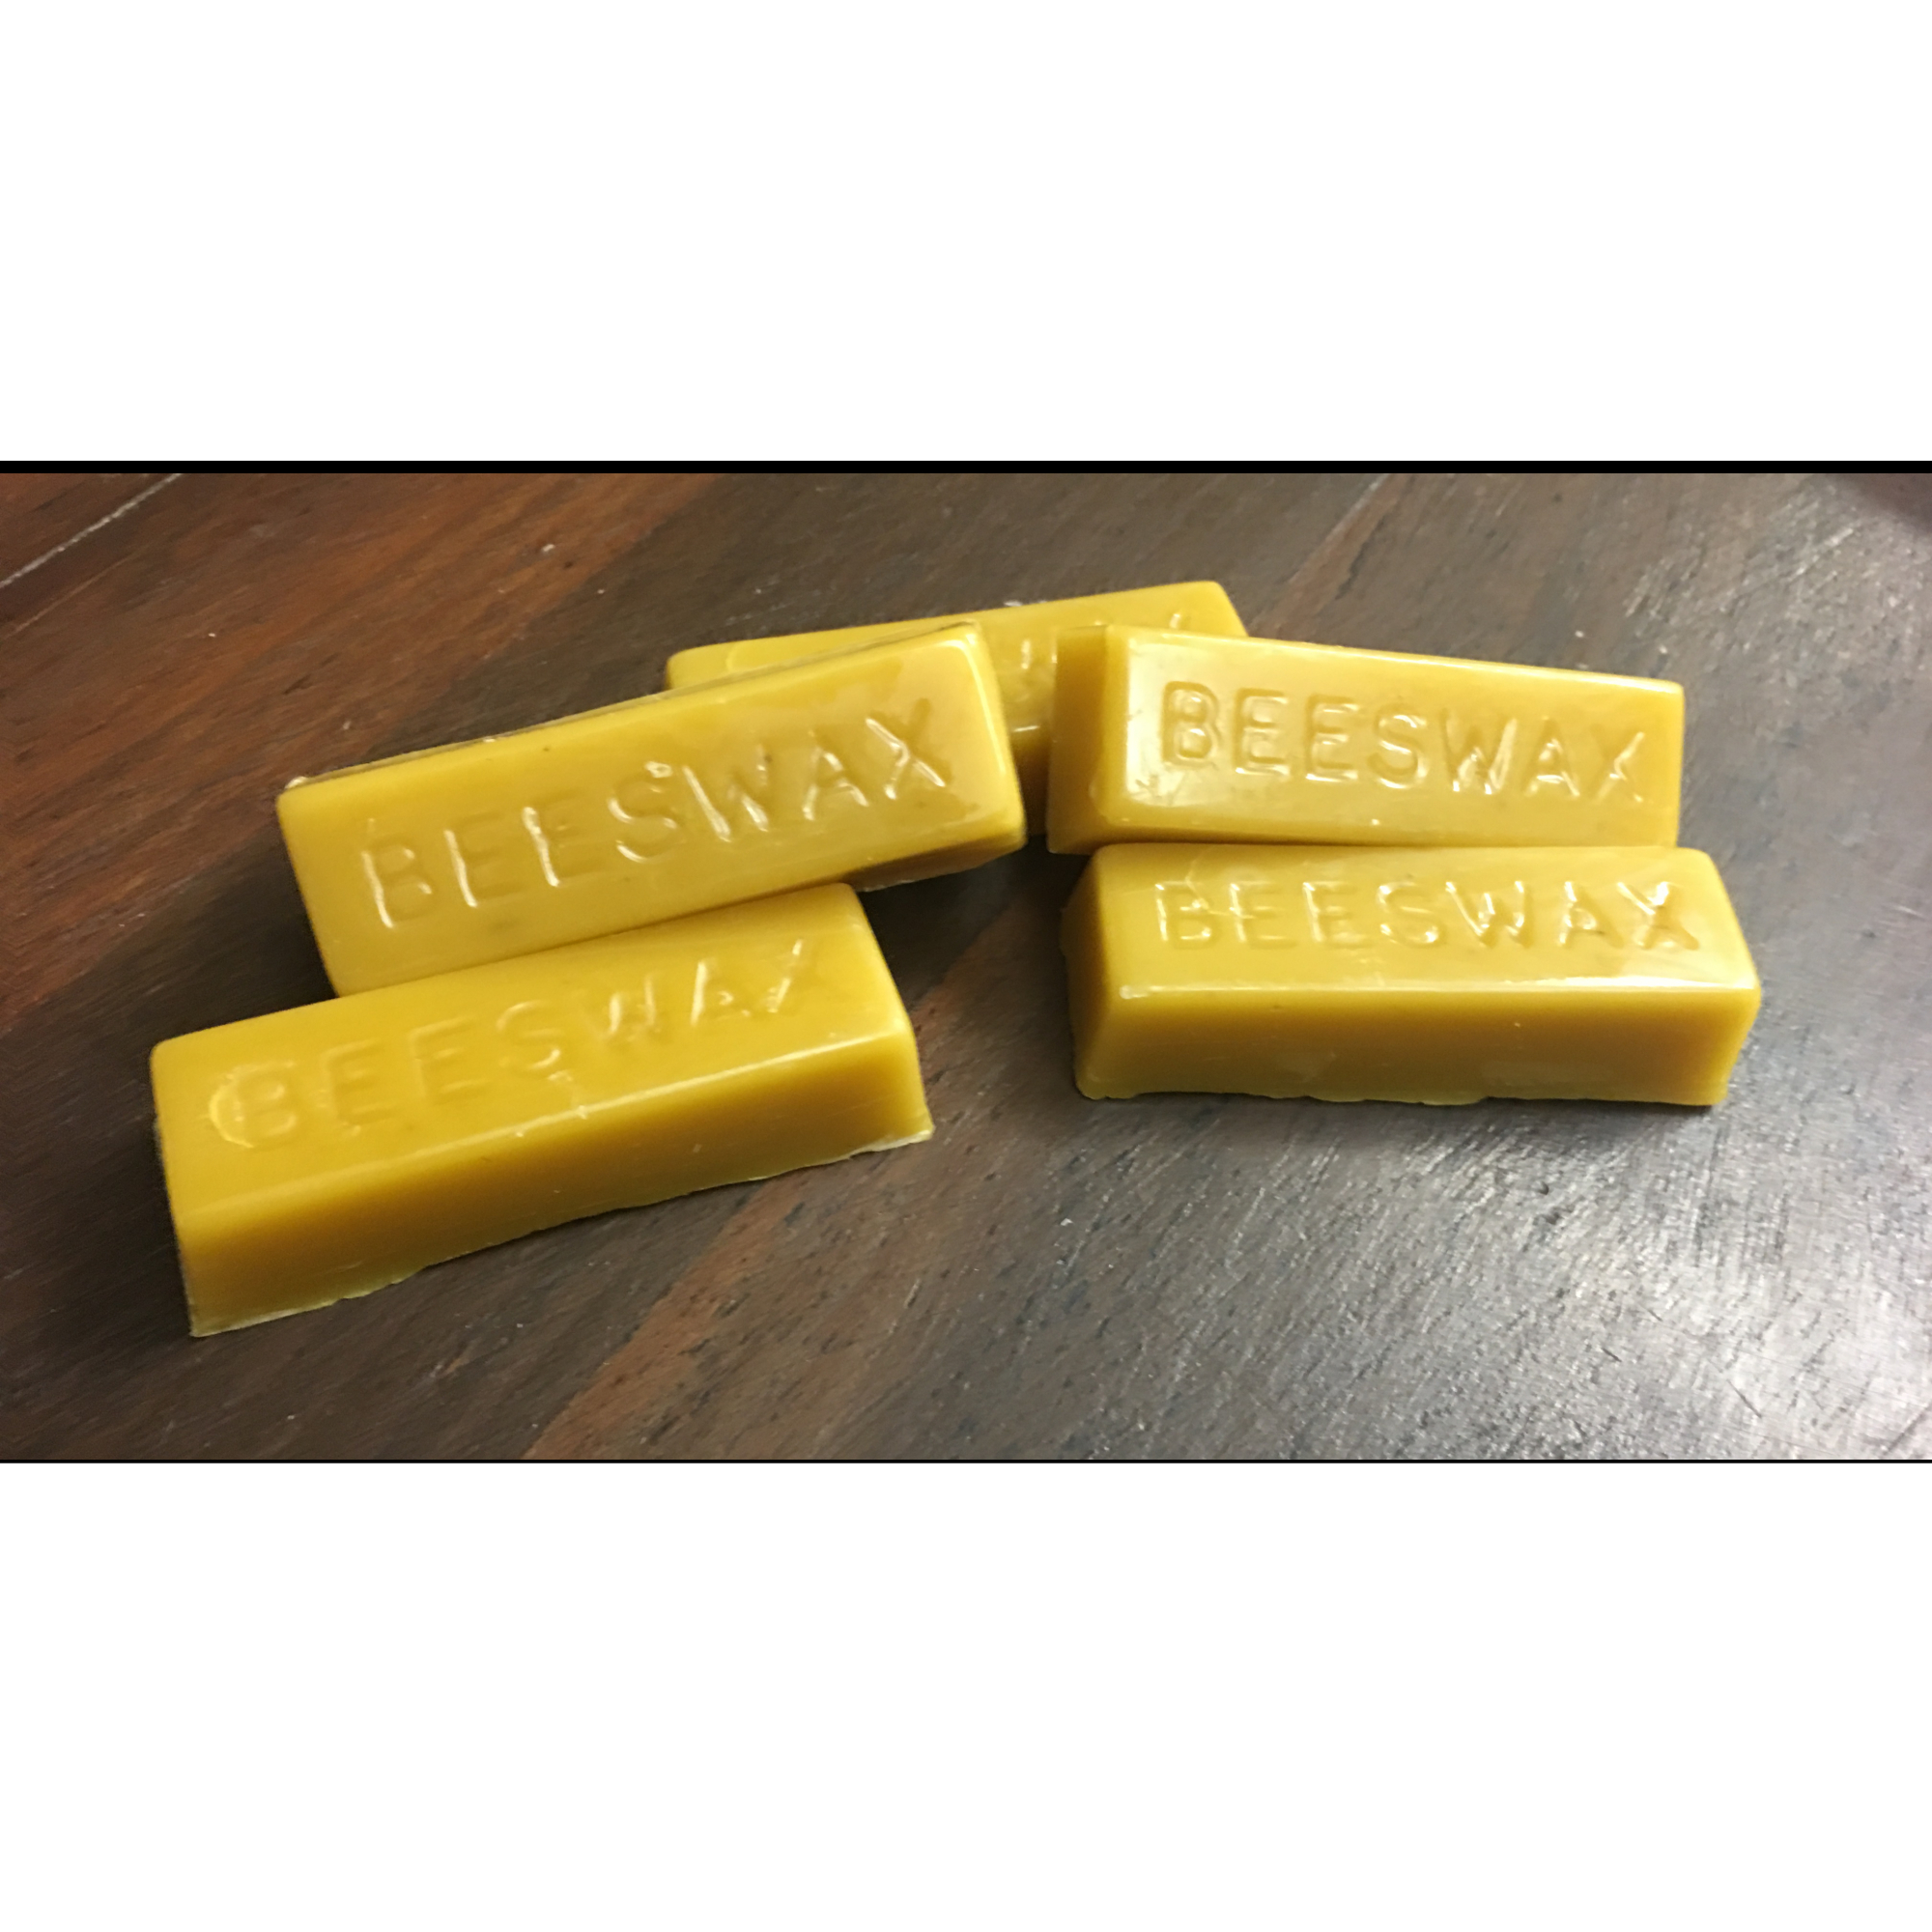 10 lb Unfiltered Beeswax